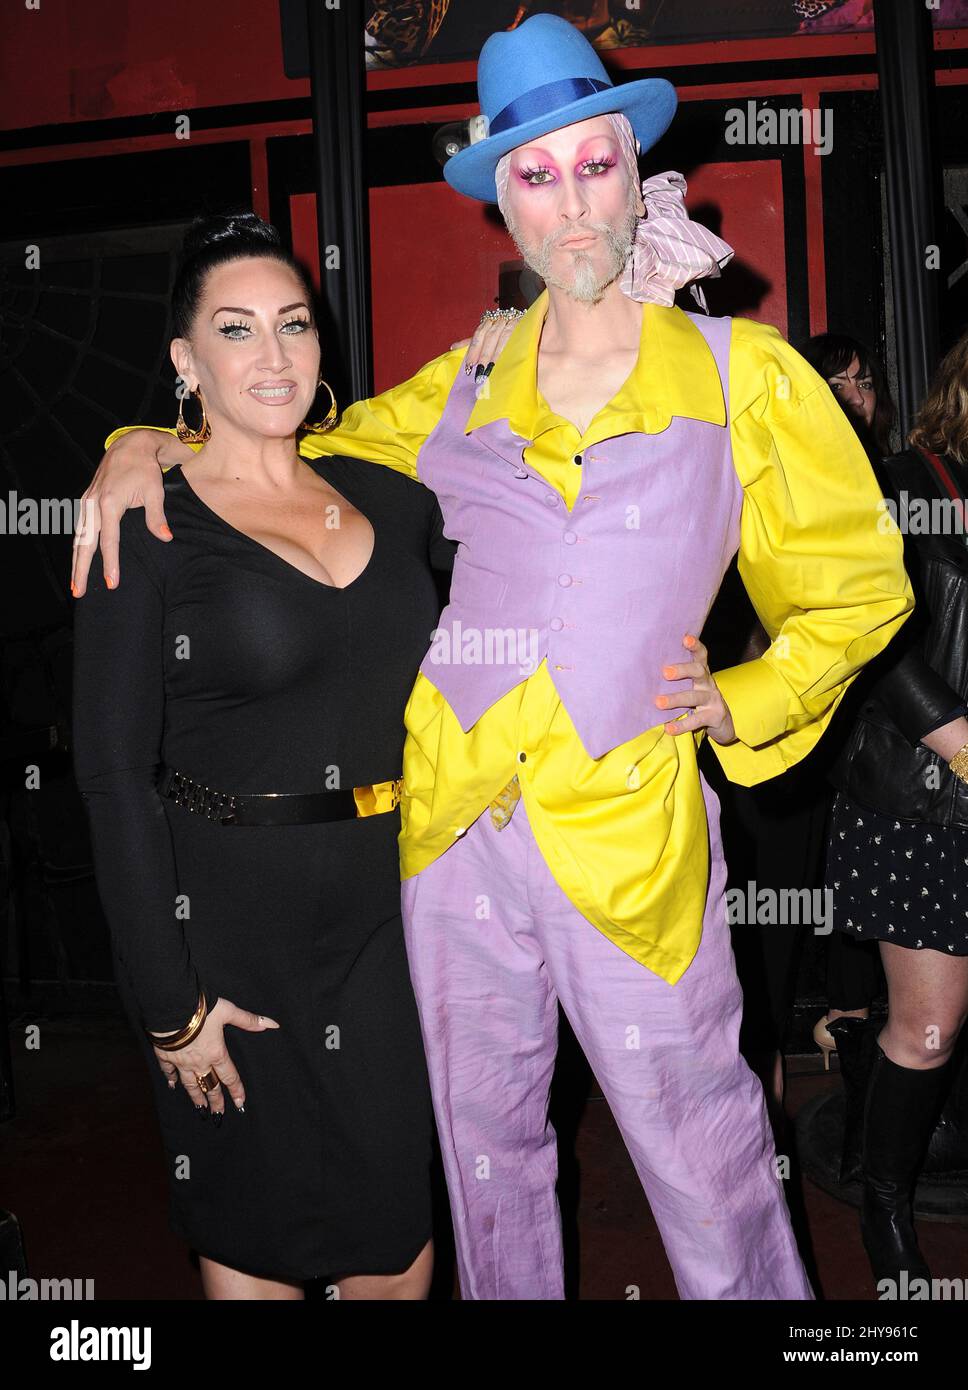 Michelle Visage (left) and Mathu Andersen attend RuPaul's Drag Race Season 8 Premiere held at the Mayan Theatre Stock Photo